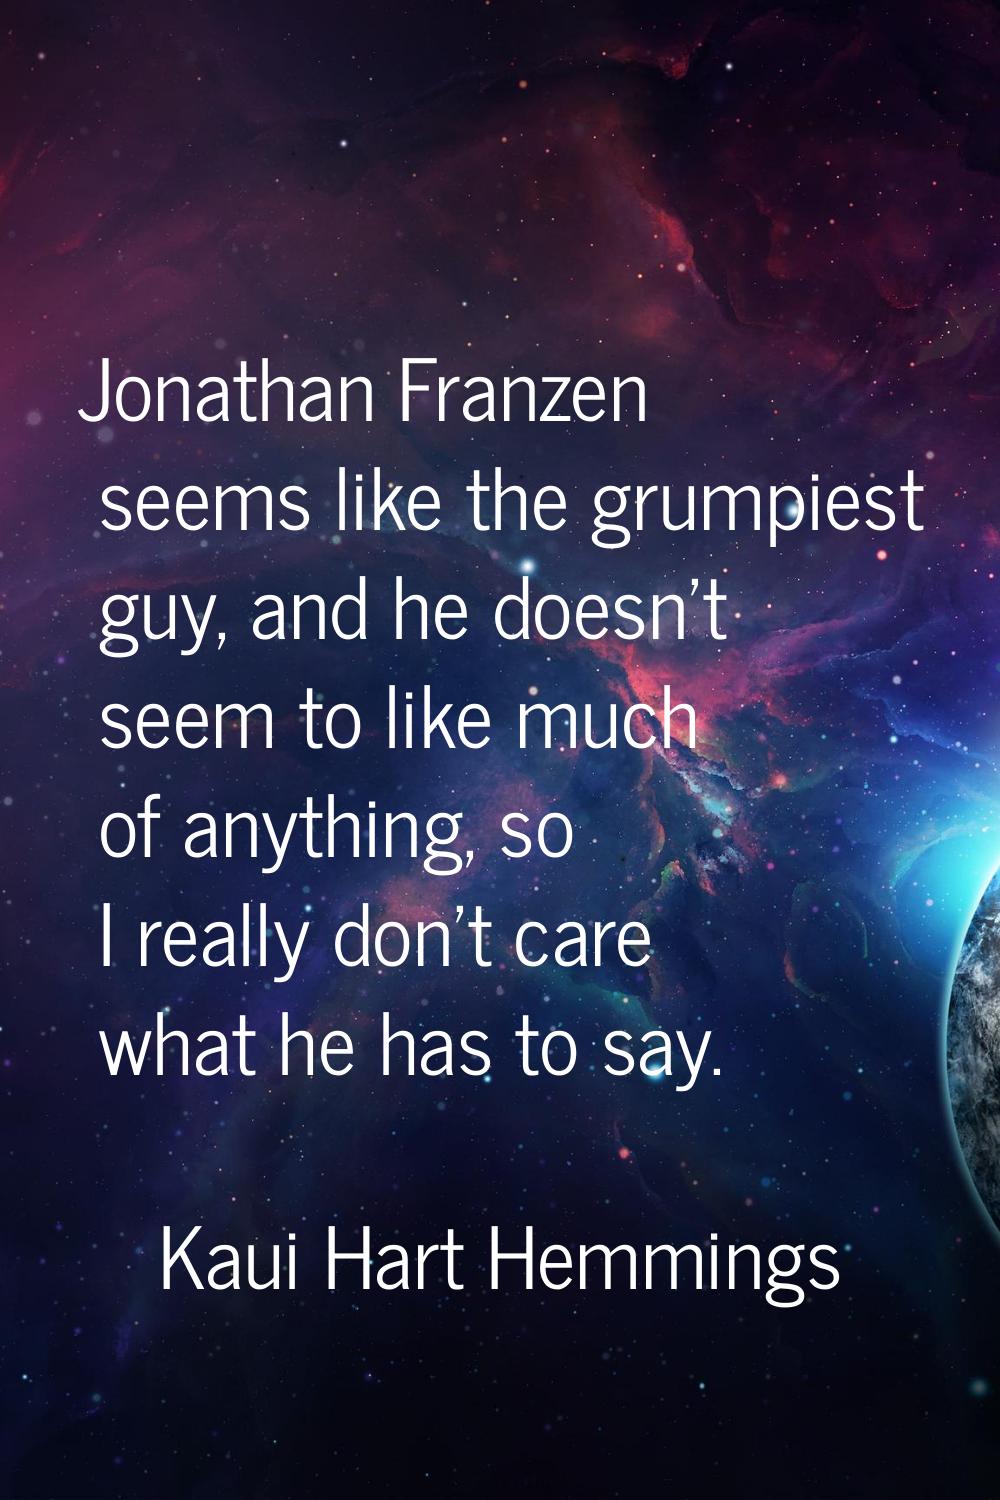 Jonathan Franzen seems like the grumpiest guy, and he doesn't seem to like much of anything, so I r